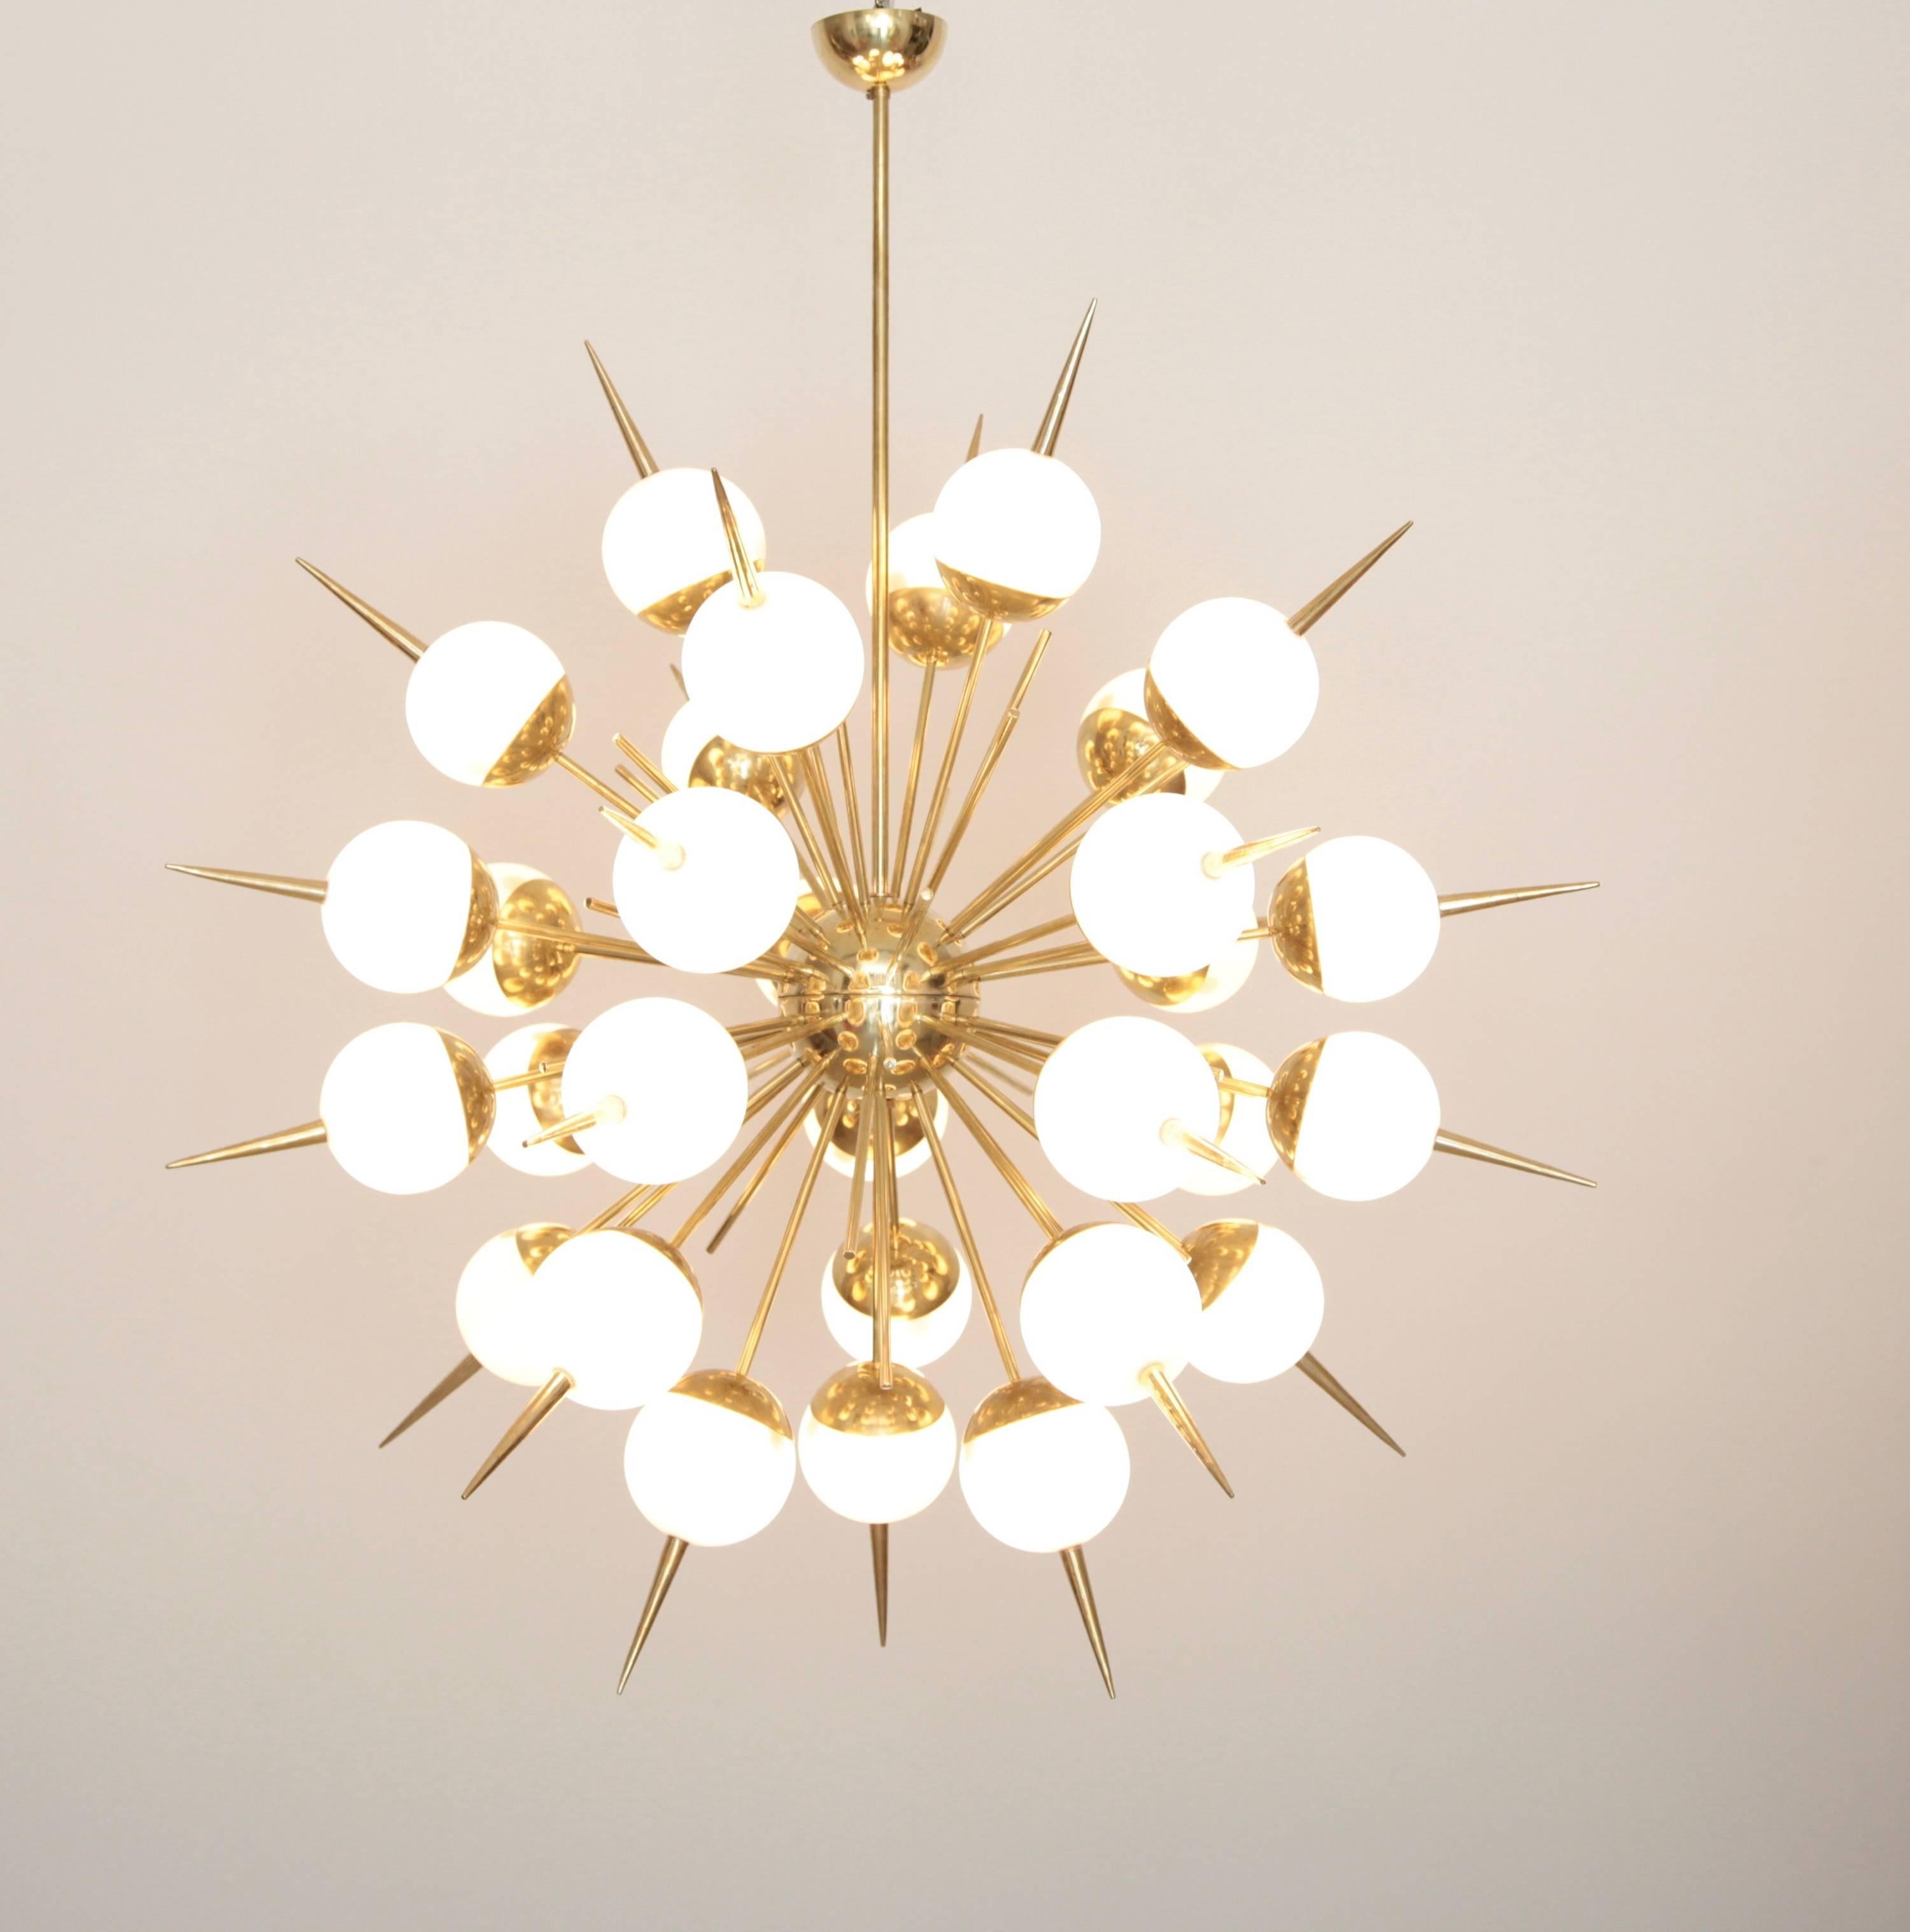 Exceptional huge mother of pearl colored Murano glass and brass Sputnik chandeliers. The chandeliers have a very impressing size and there are real eyecatchers in every room. The chandeliers are in excellent condition.
Measures: 30 x E14.
To be on